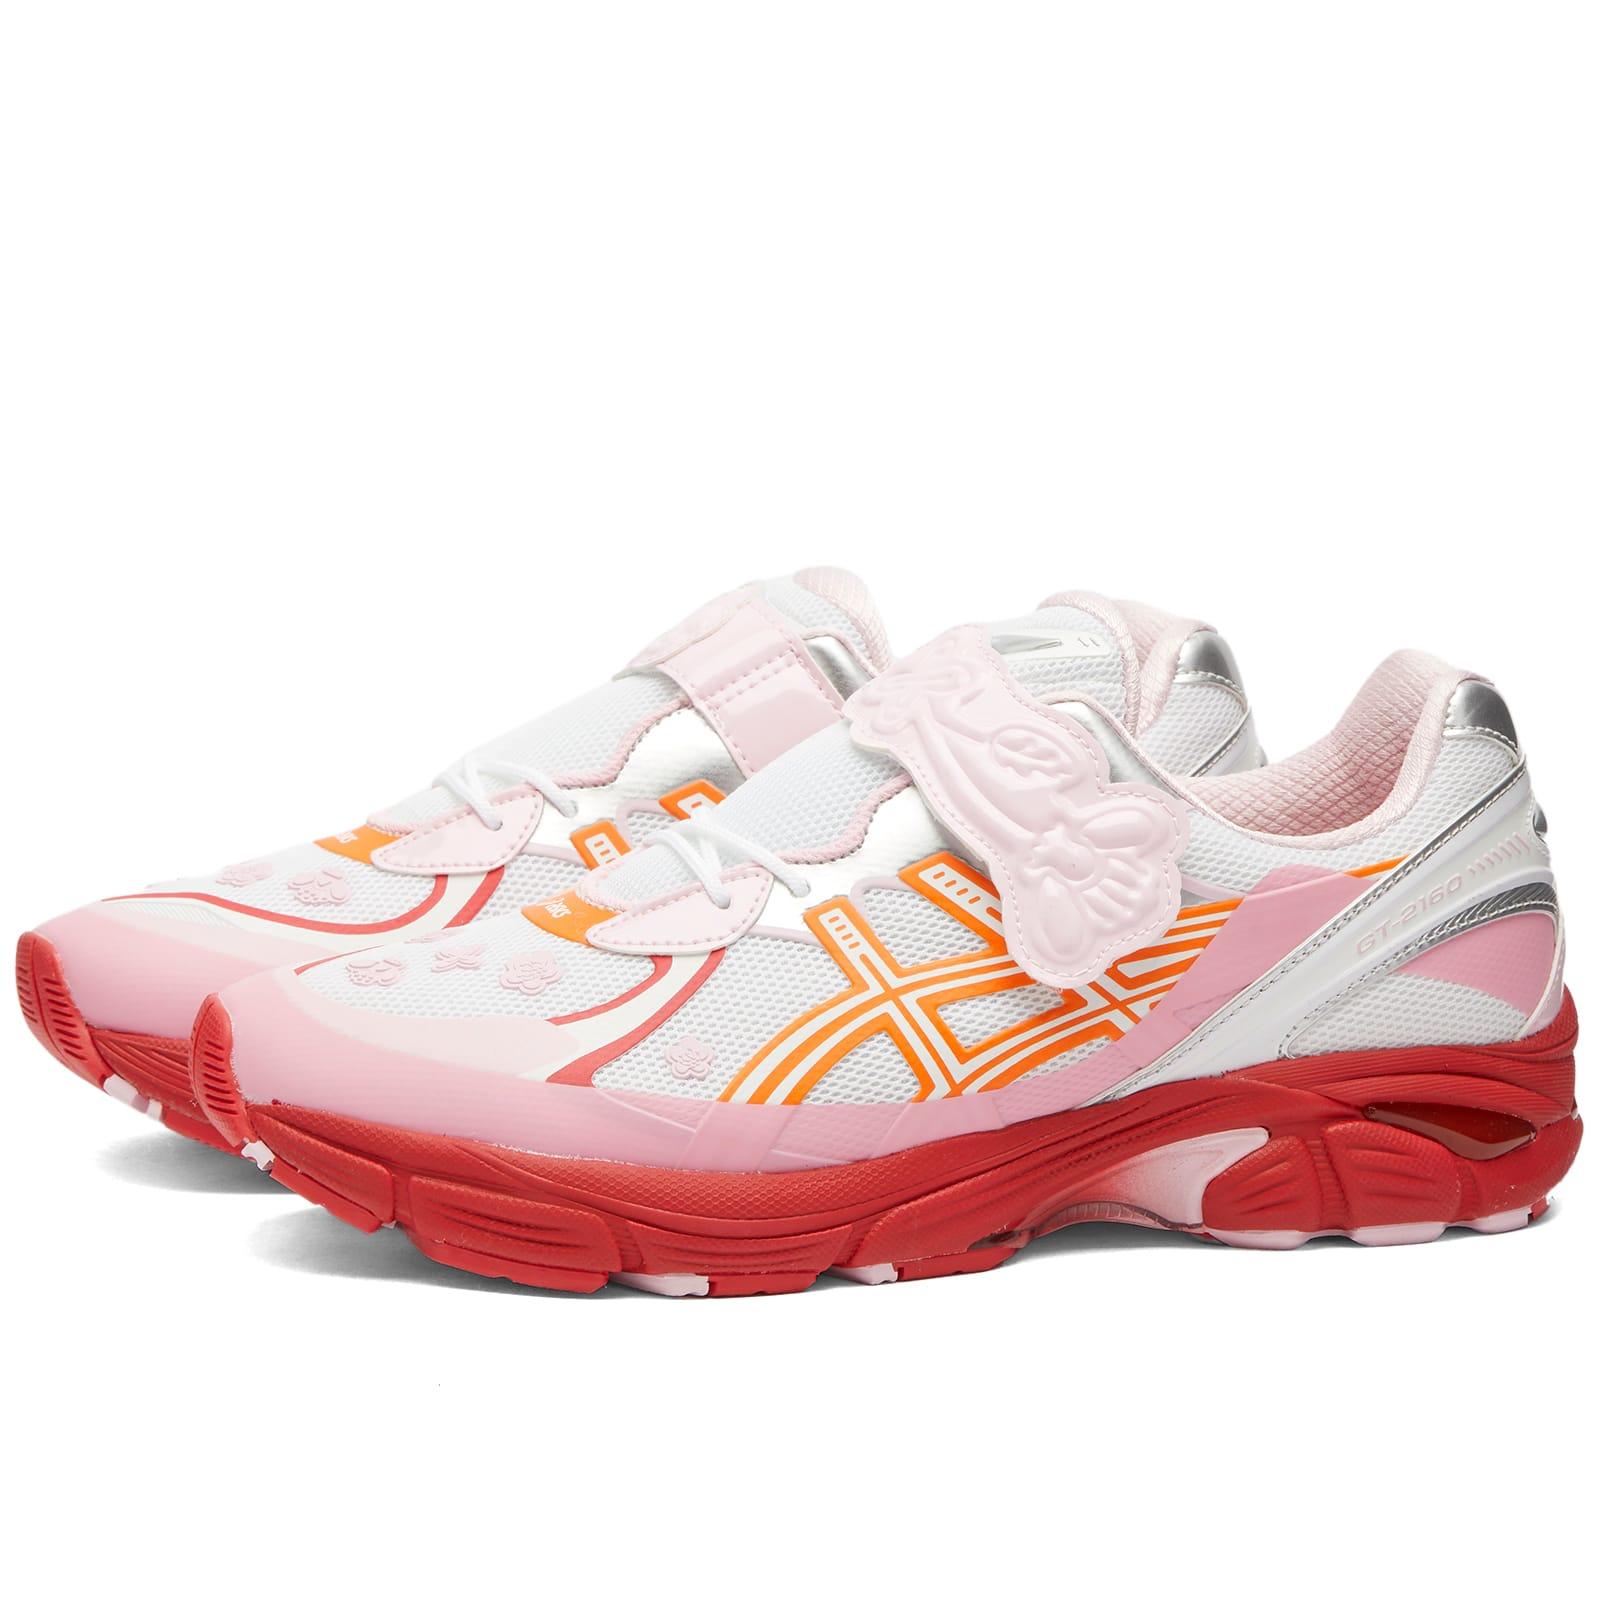 Asics X Cecilie Bahnsen Gt-2160 Sneakers in Pink | Lyst